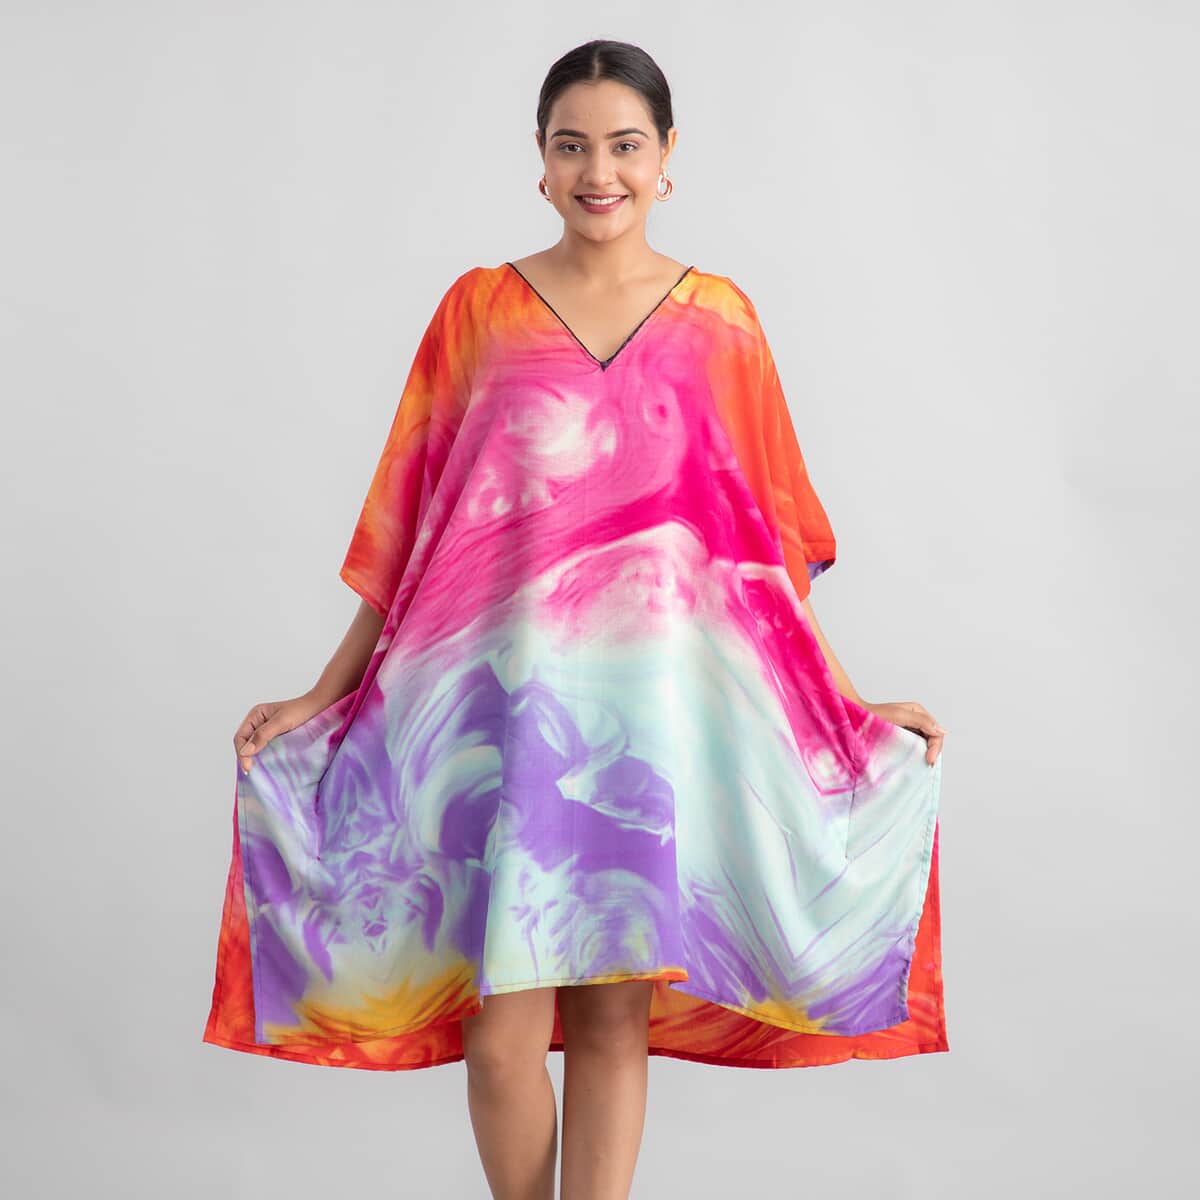 TAMSY Marble Blue Pink Screen Printed Mid Short Kaftan - One Size Fits Most (36"x41") image number 1